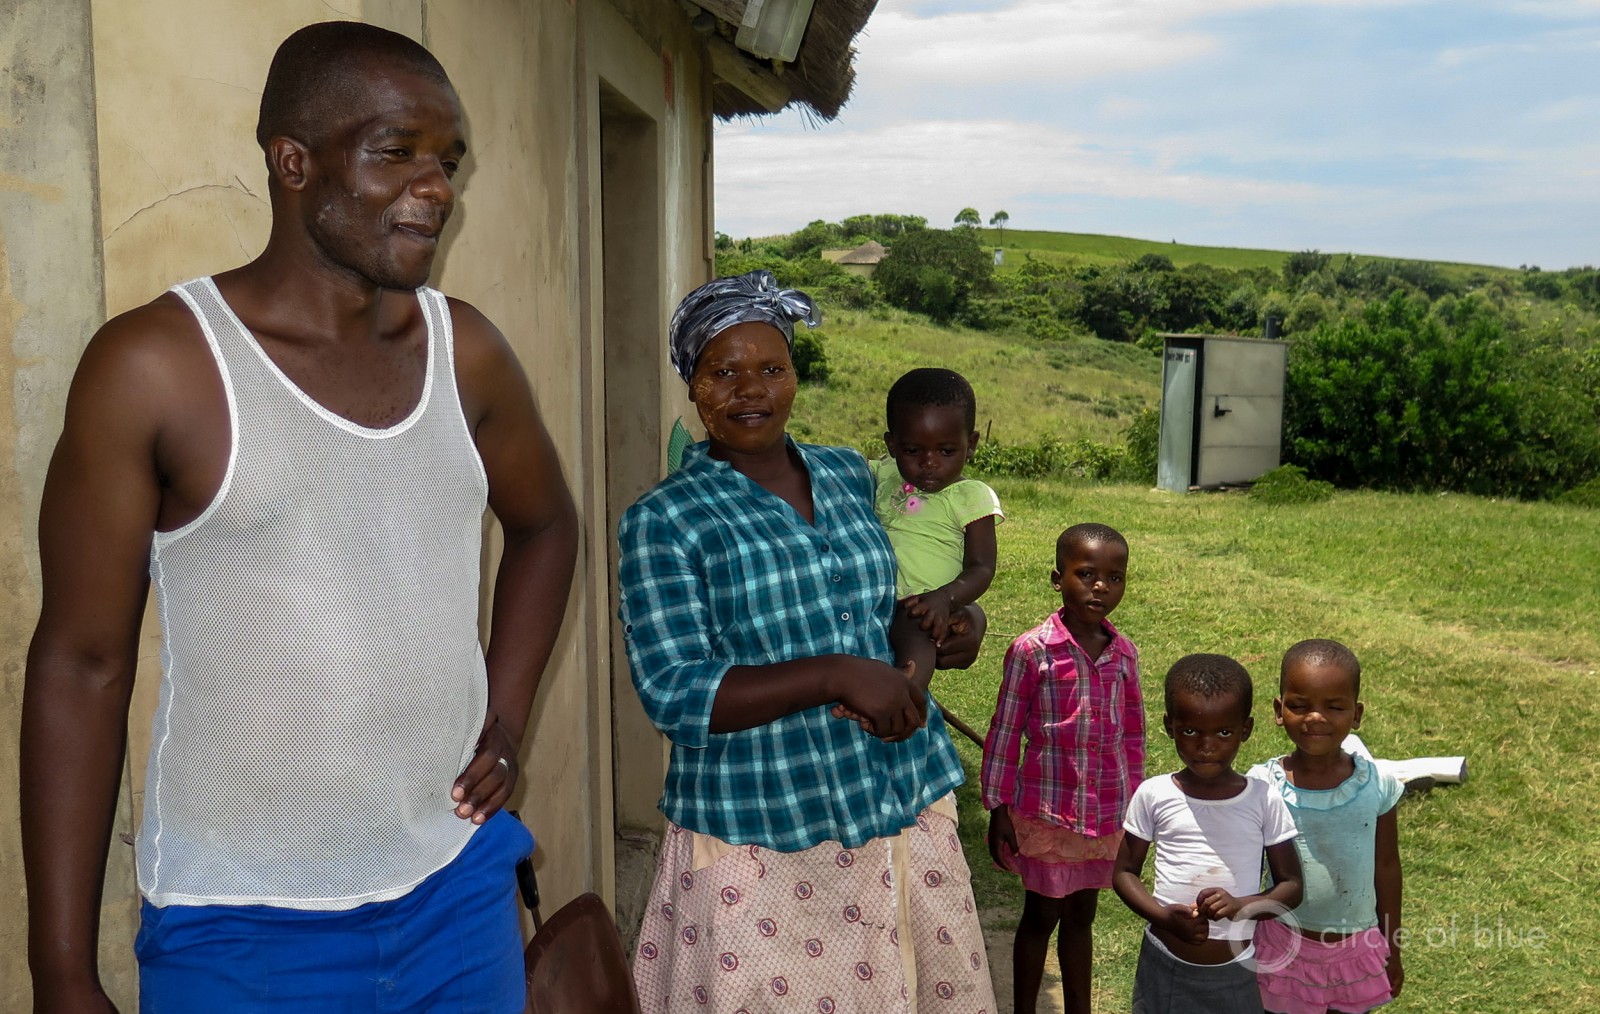 “This is our land,” said Zwelidumile Yalo, a farmer who lives with his wife and four small children close to the proposed boundary of the new mine he loathes. “It will not be taken away from us.